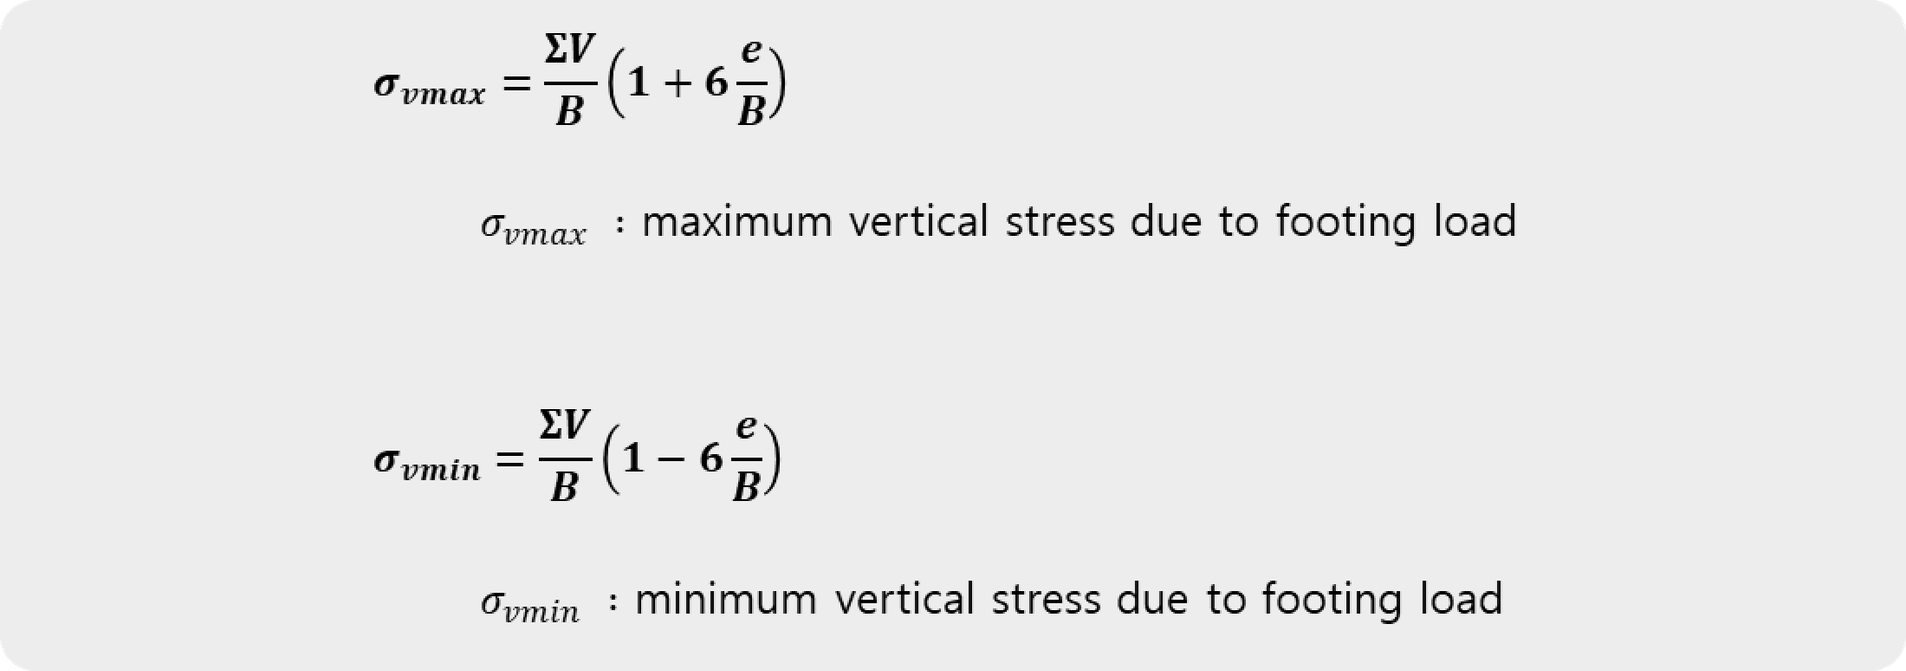 The vertical stress calculation 2